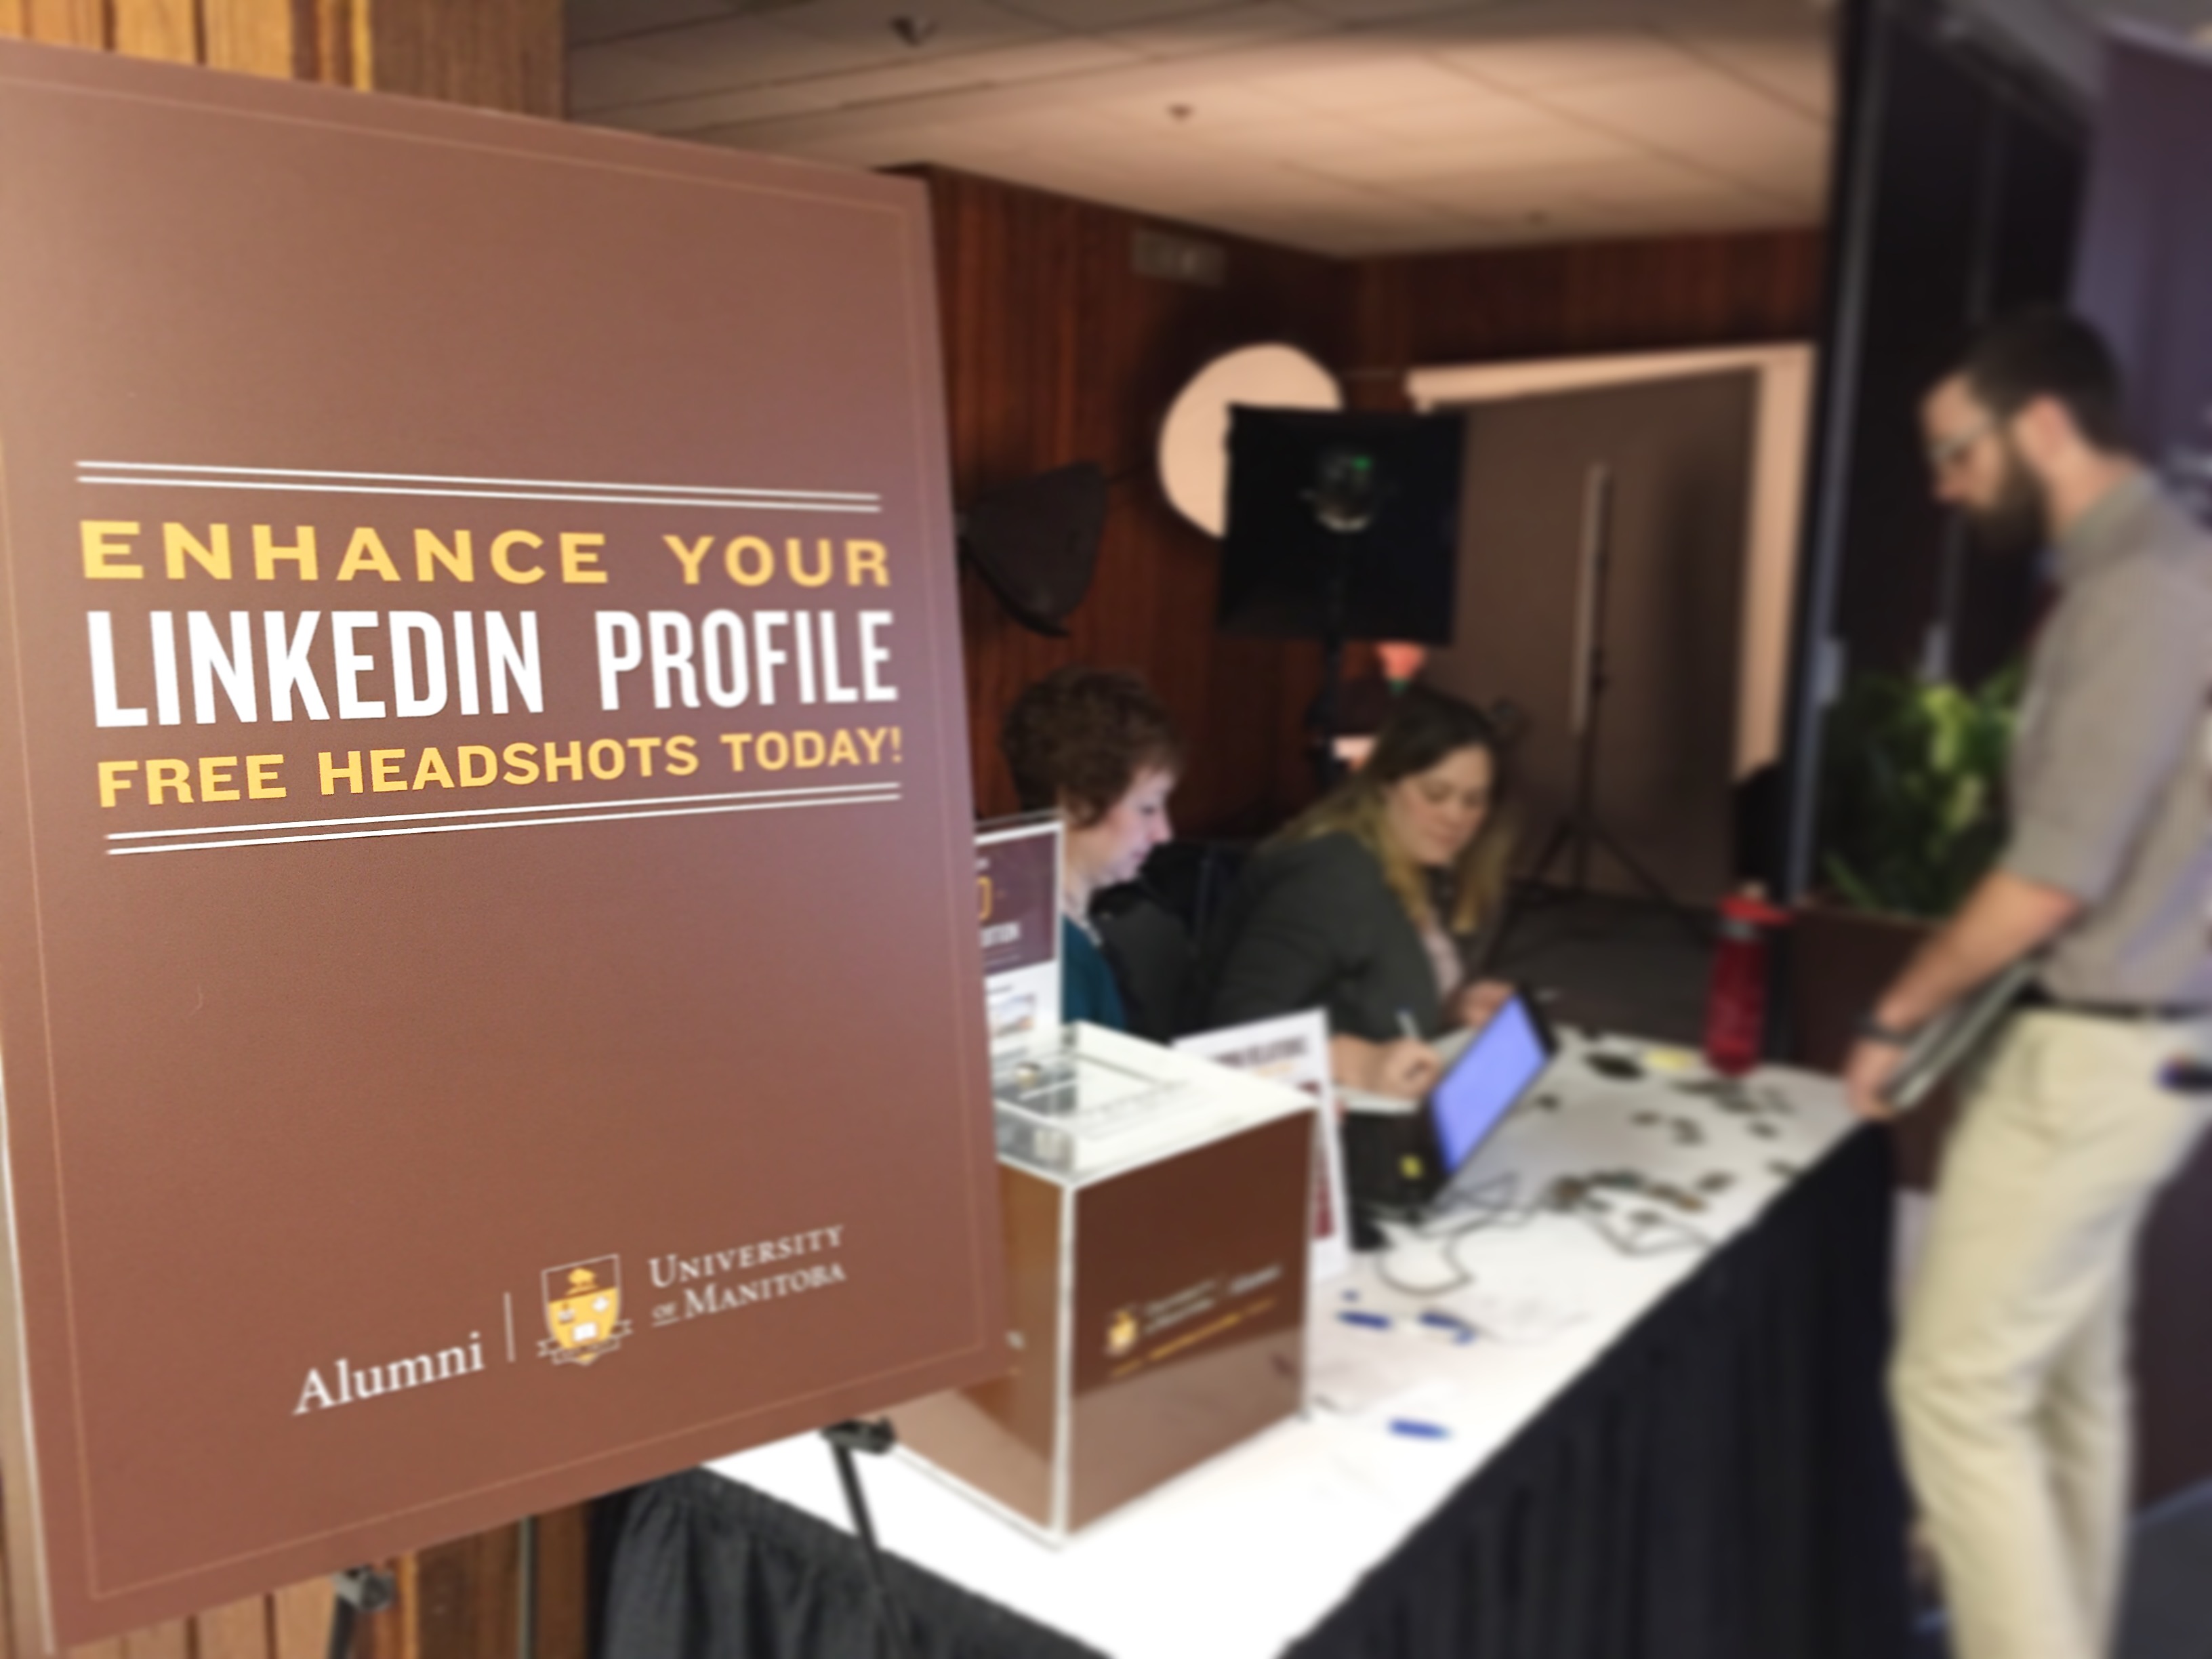 Get your free headshot to use on your LinkedIn profile, courtesy of Alumni Relations